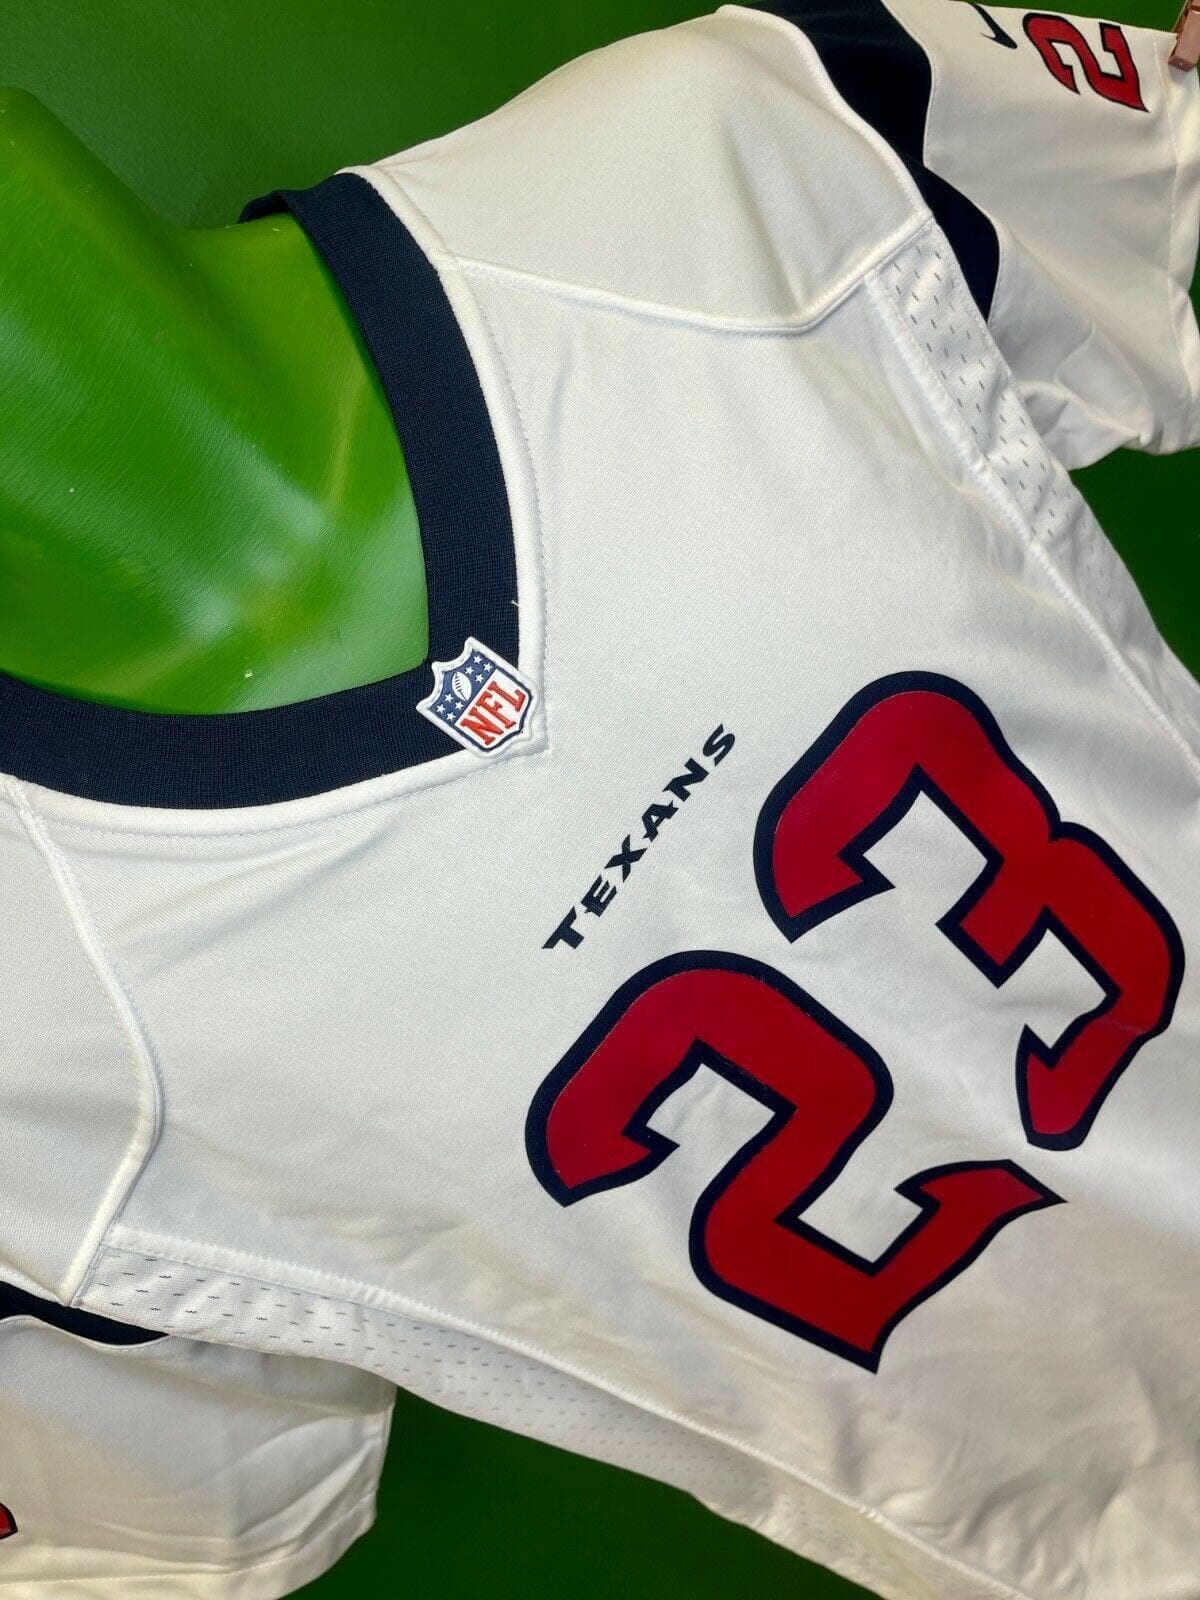 NFL Houston Texans Arian Foster #23 Game Jersey Youth Large 14-16 NWT